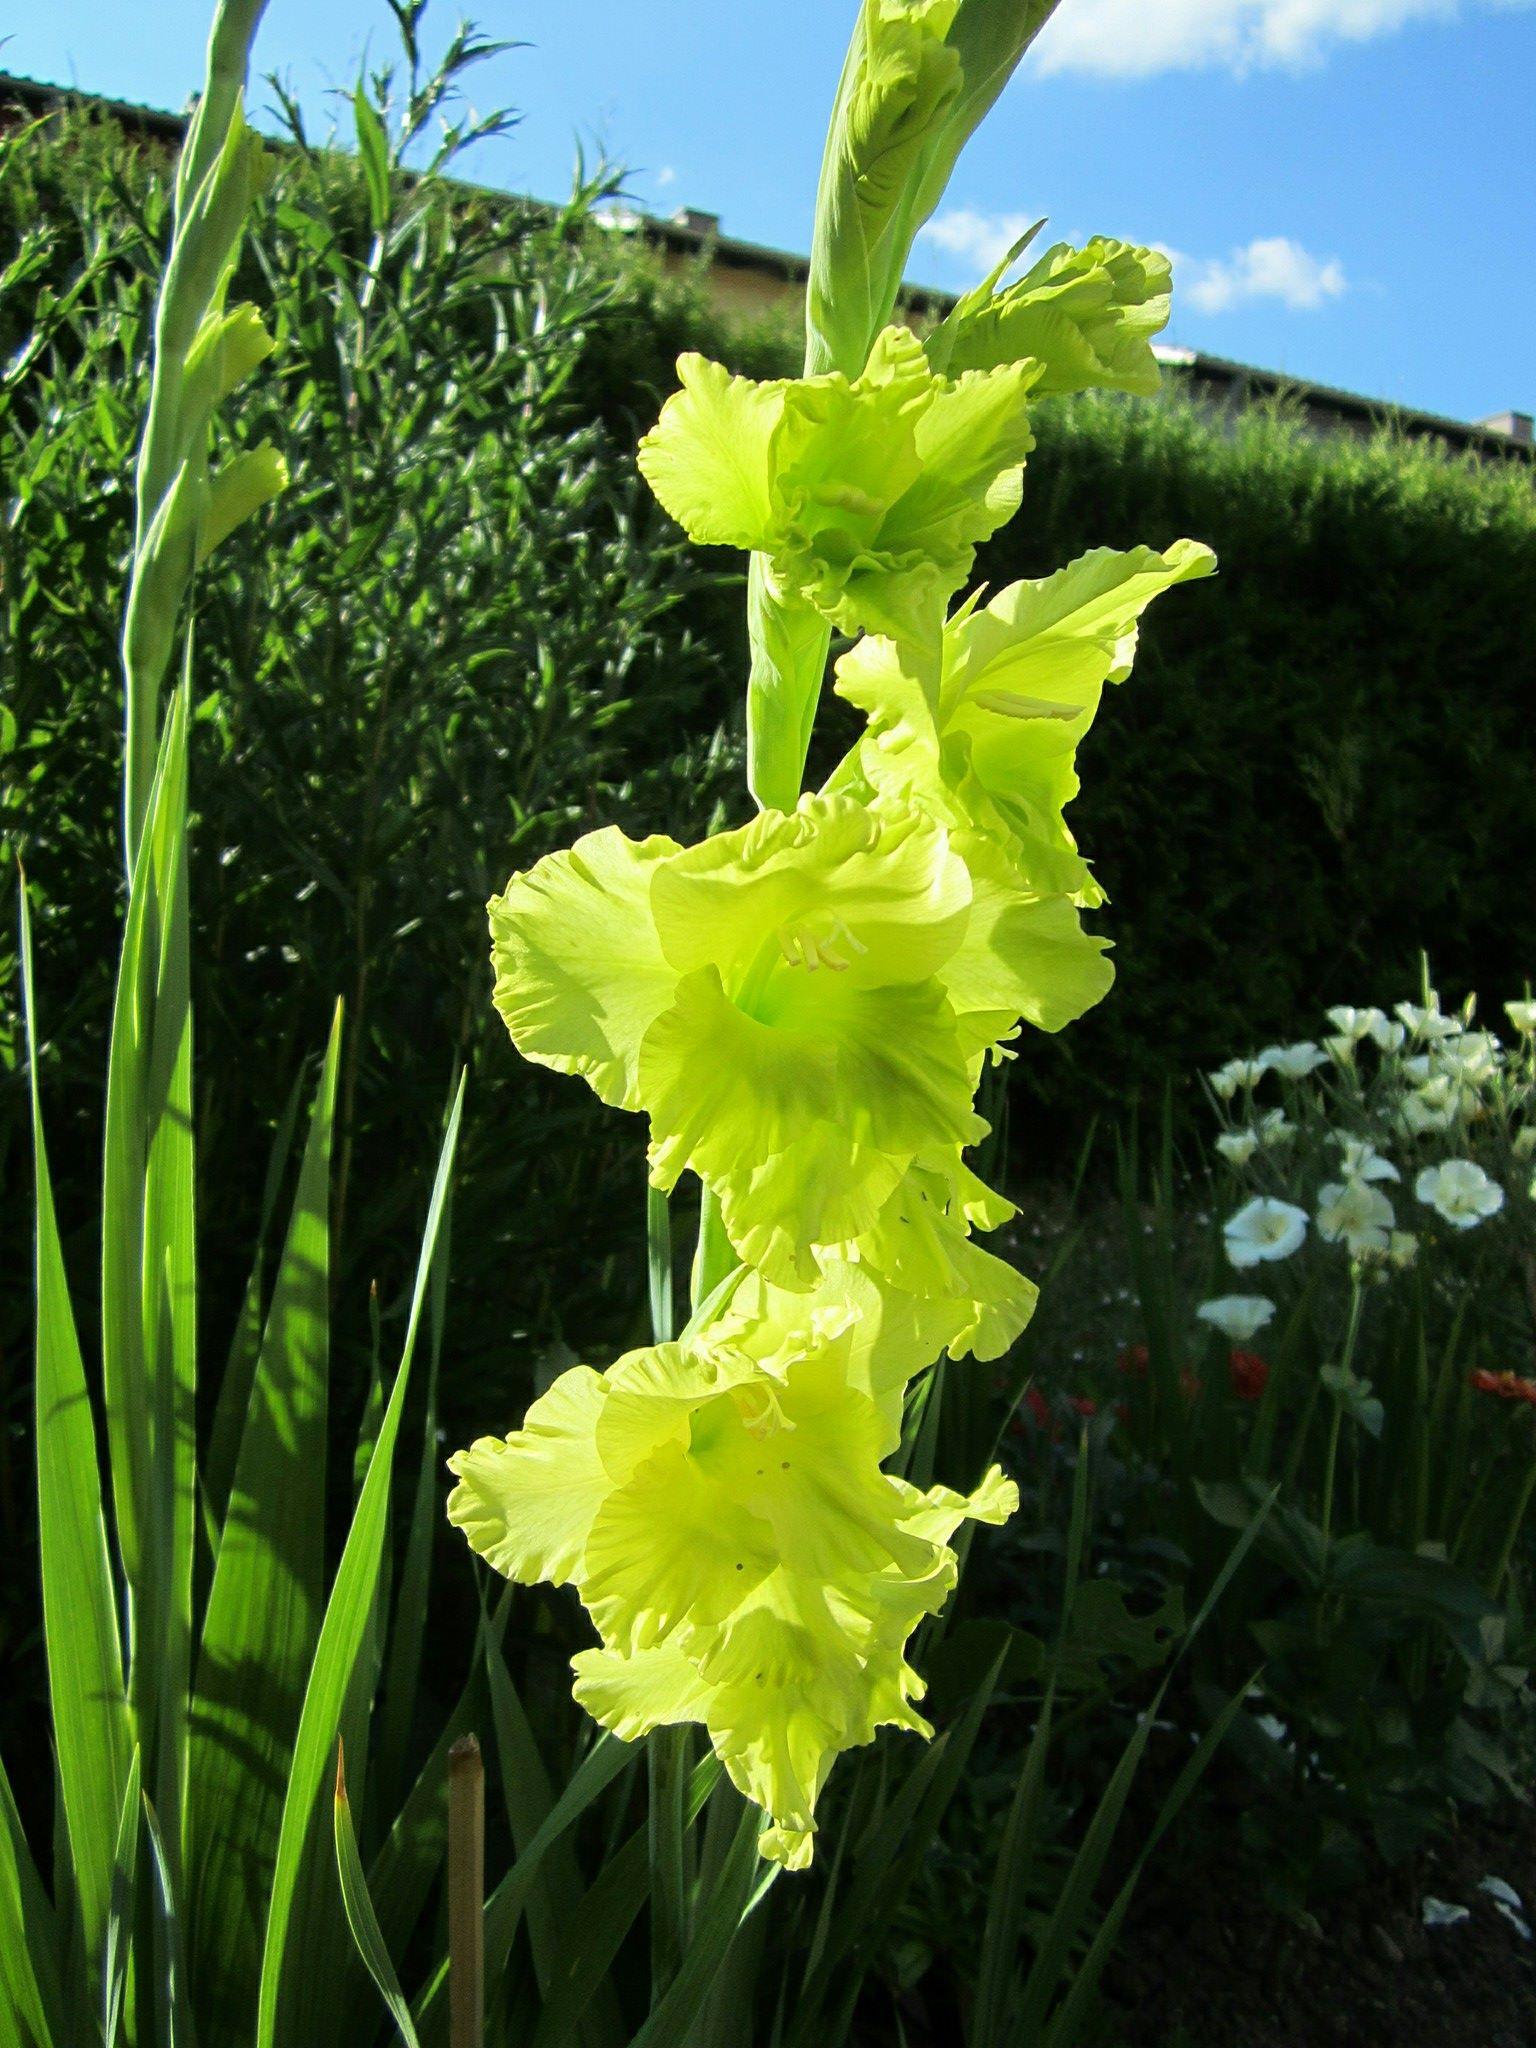 Gladiolus 'Green Star' - Large Flowering Gladiolus (Shipping begins Feb. 1) from Leo Berbee Bulb Company